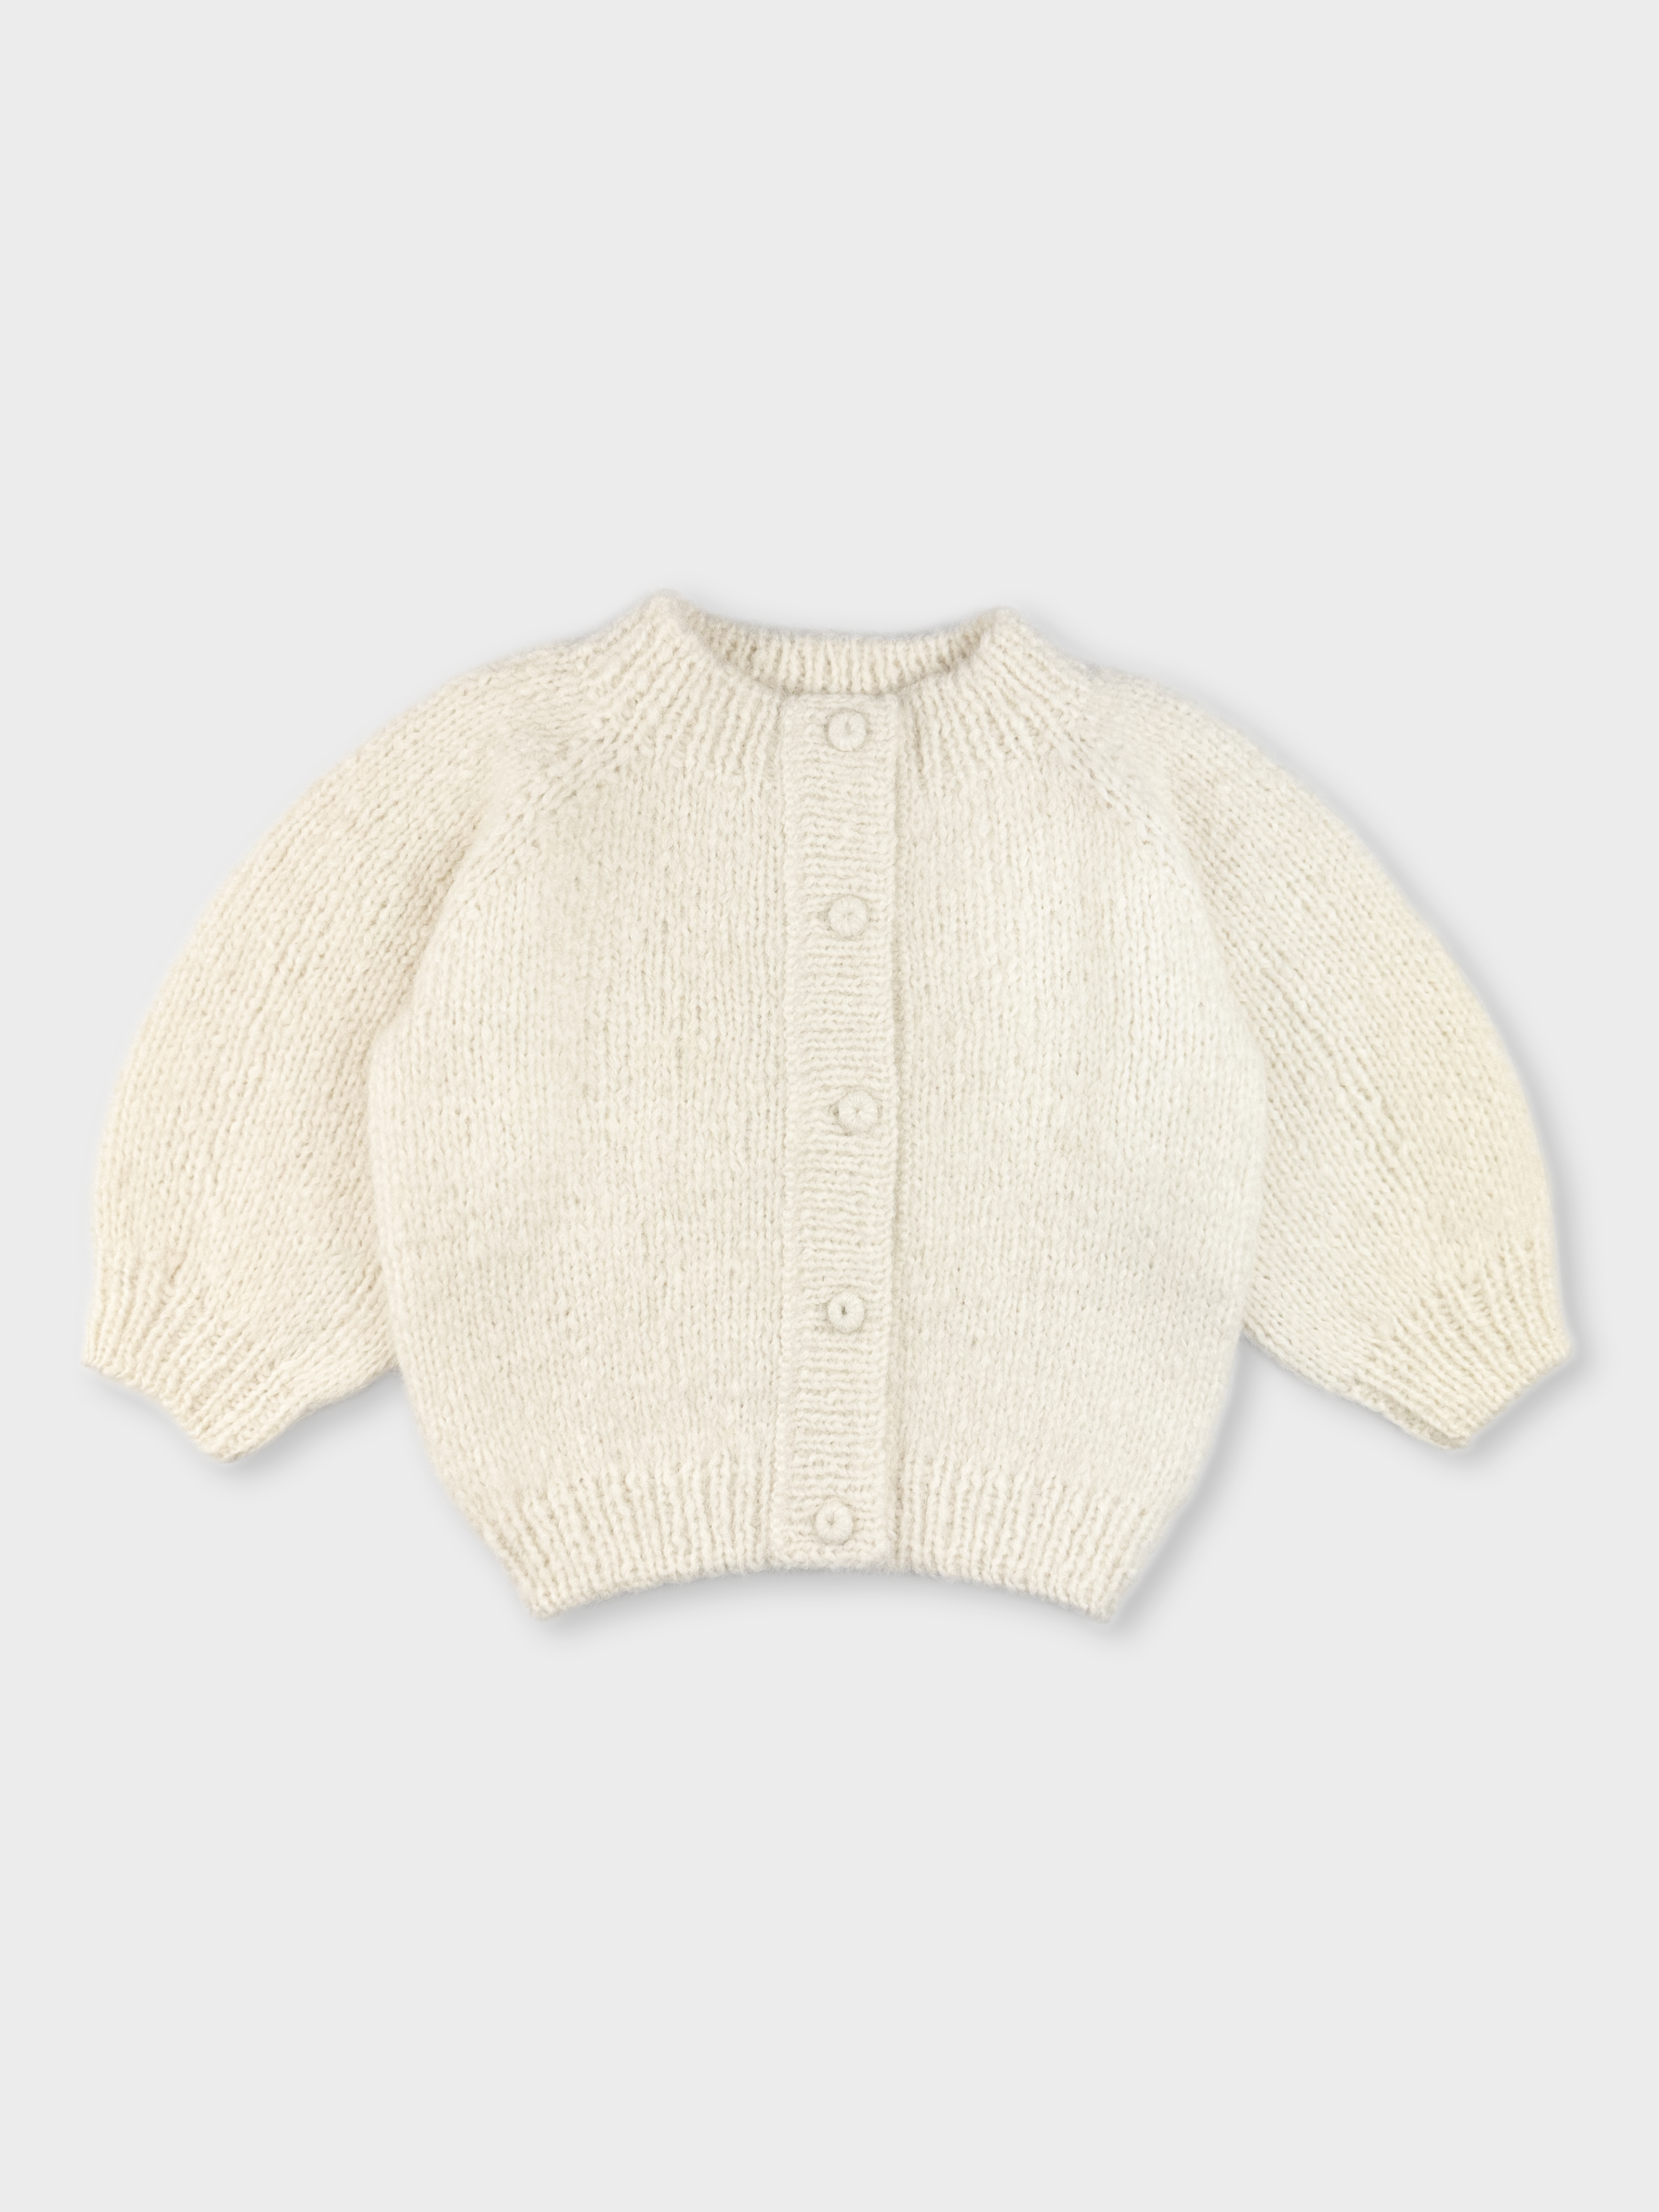 White Hand-Knitted Cardigan